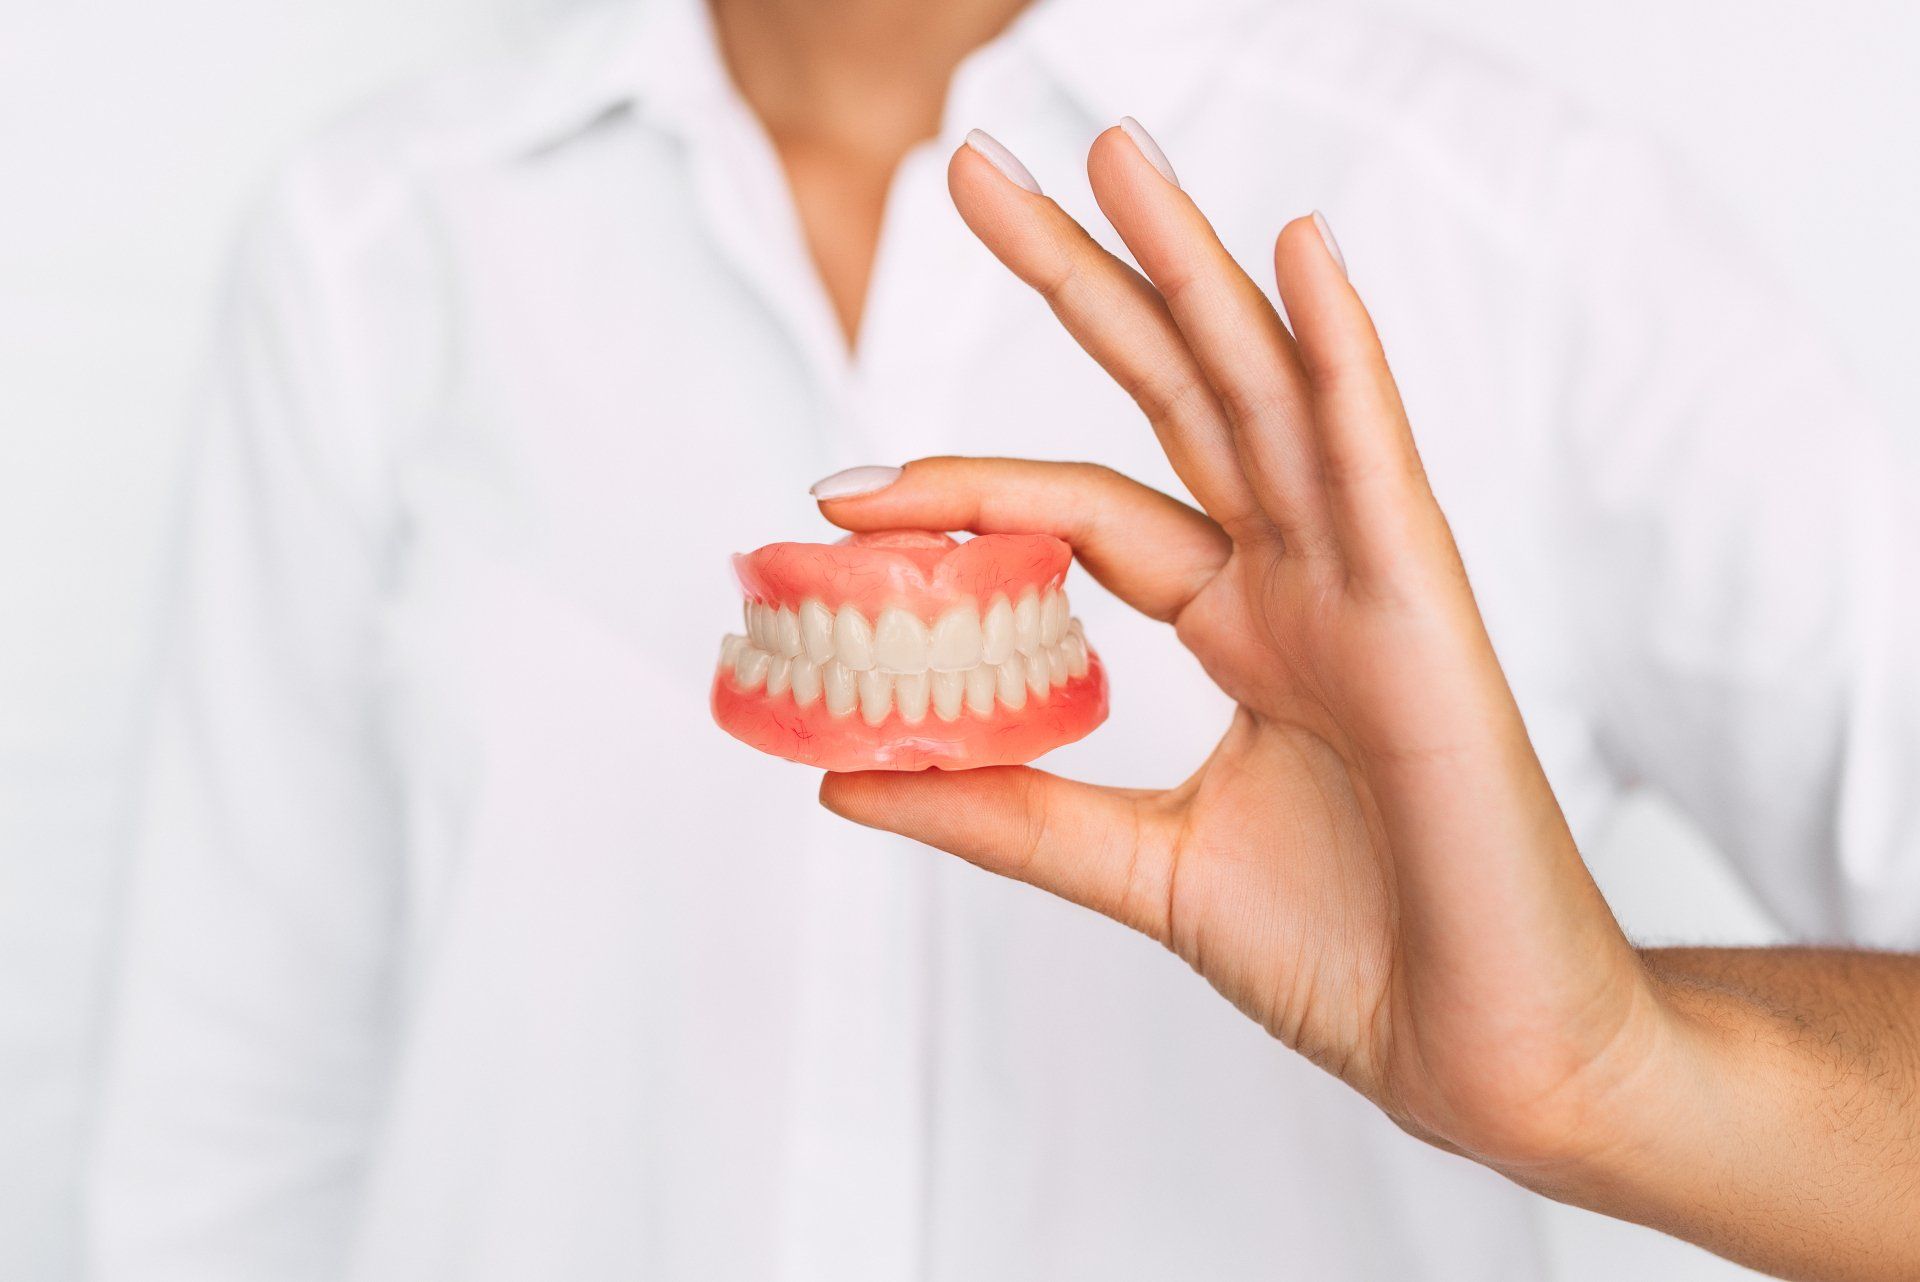 A woman is holding a denture in her hand.